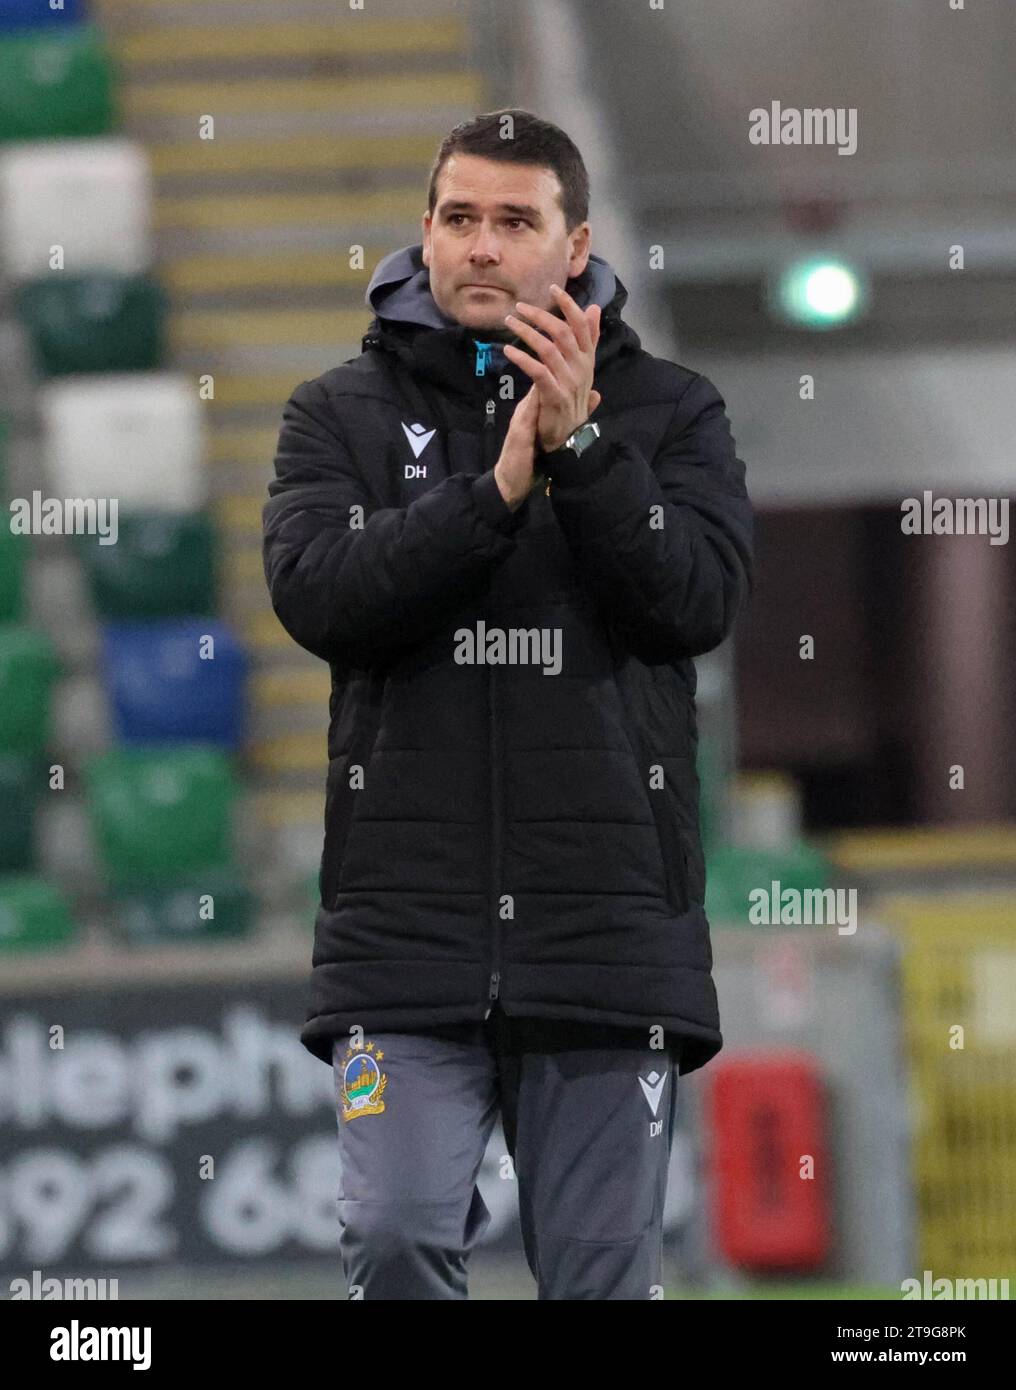 Windsor Park, Belfast, Northern Ireland, UK. 25th Nov 2023. Sports Direct Premiership – Linfield v Ballymena United. Irish Premiership action from today's game in Belfast. (Linfield in blue). Linfield manager David Healy after the win.  Credit: CAZIMB/Alamy Live News. Stock Photo